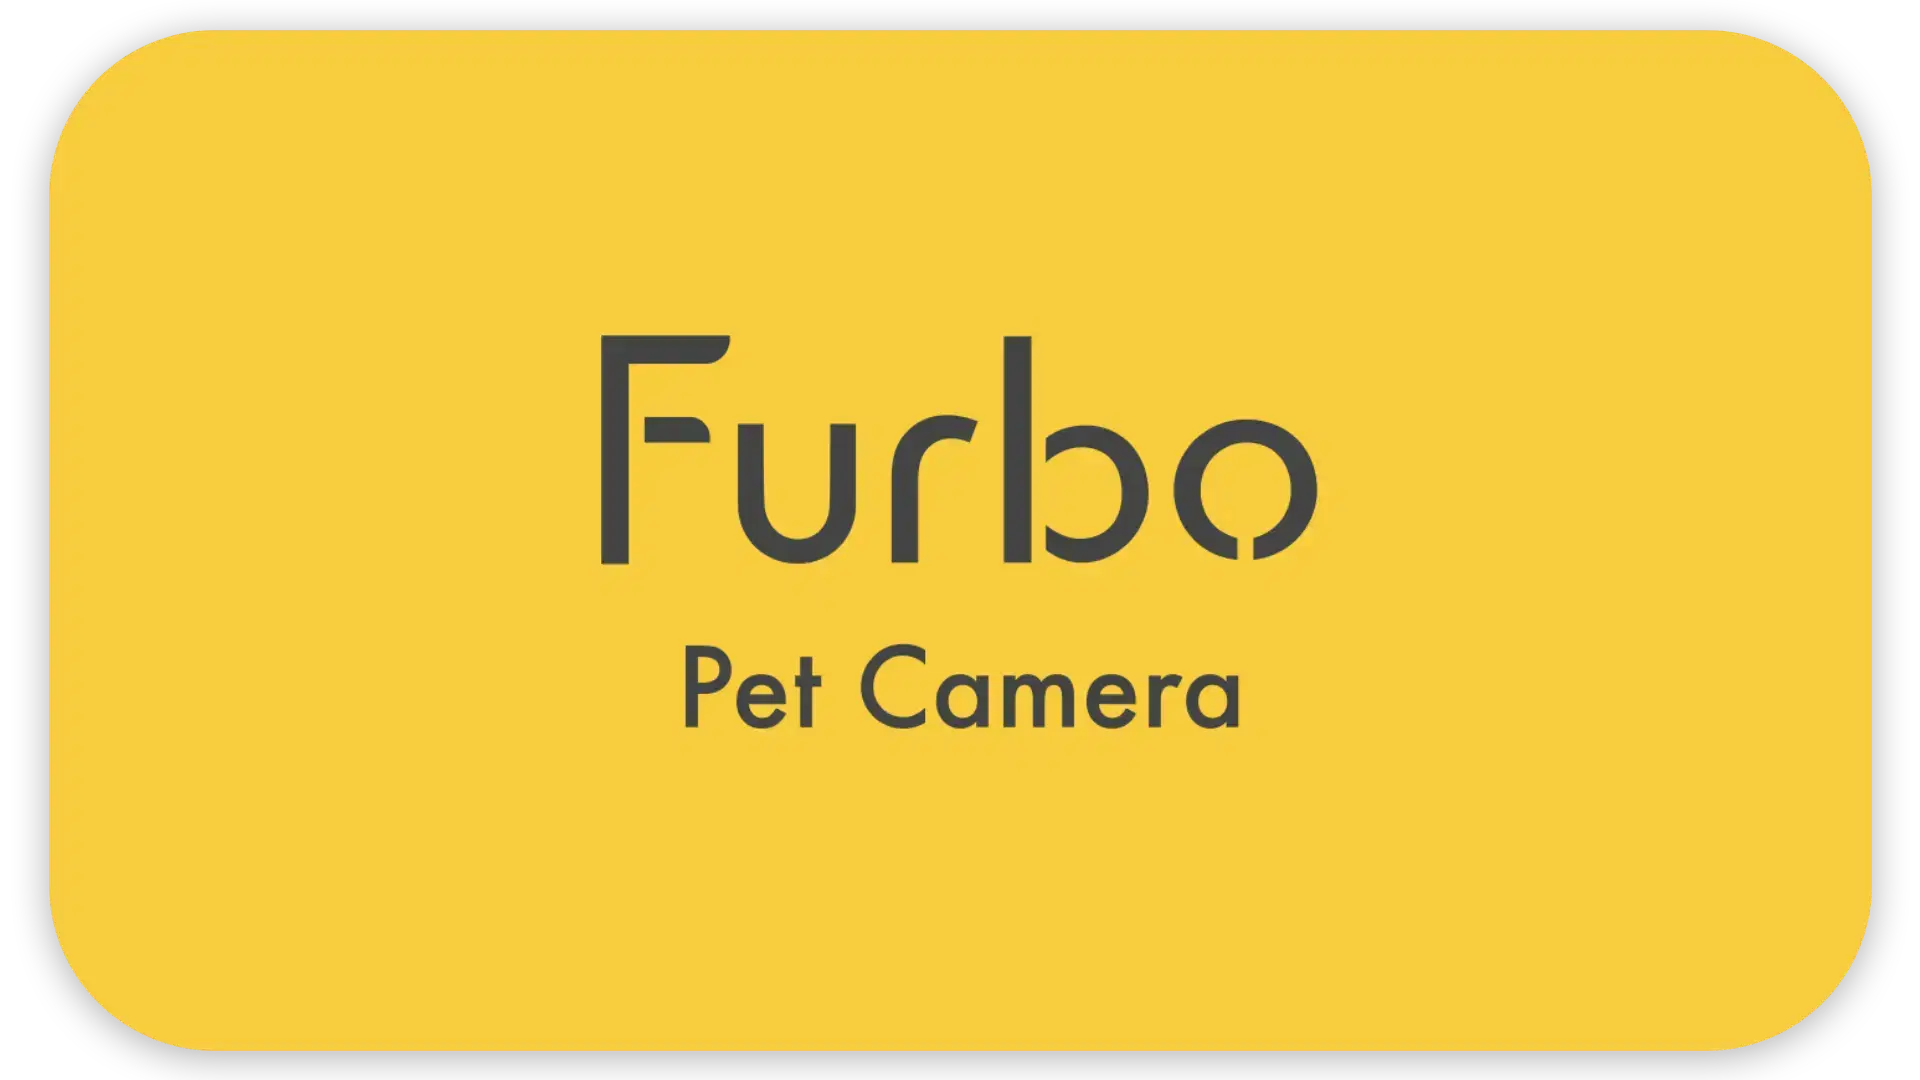 A yellow background reads "Furbo Pet Camera" in gray letters.